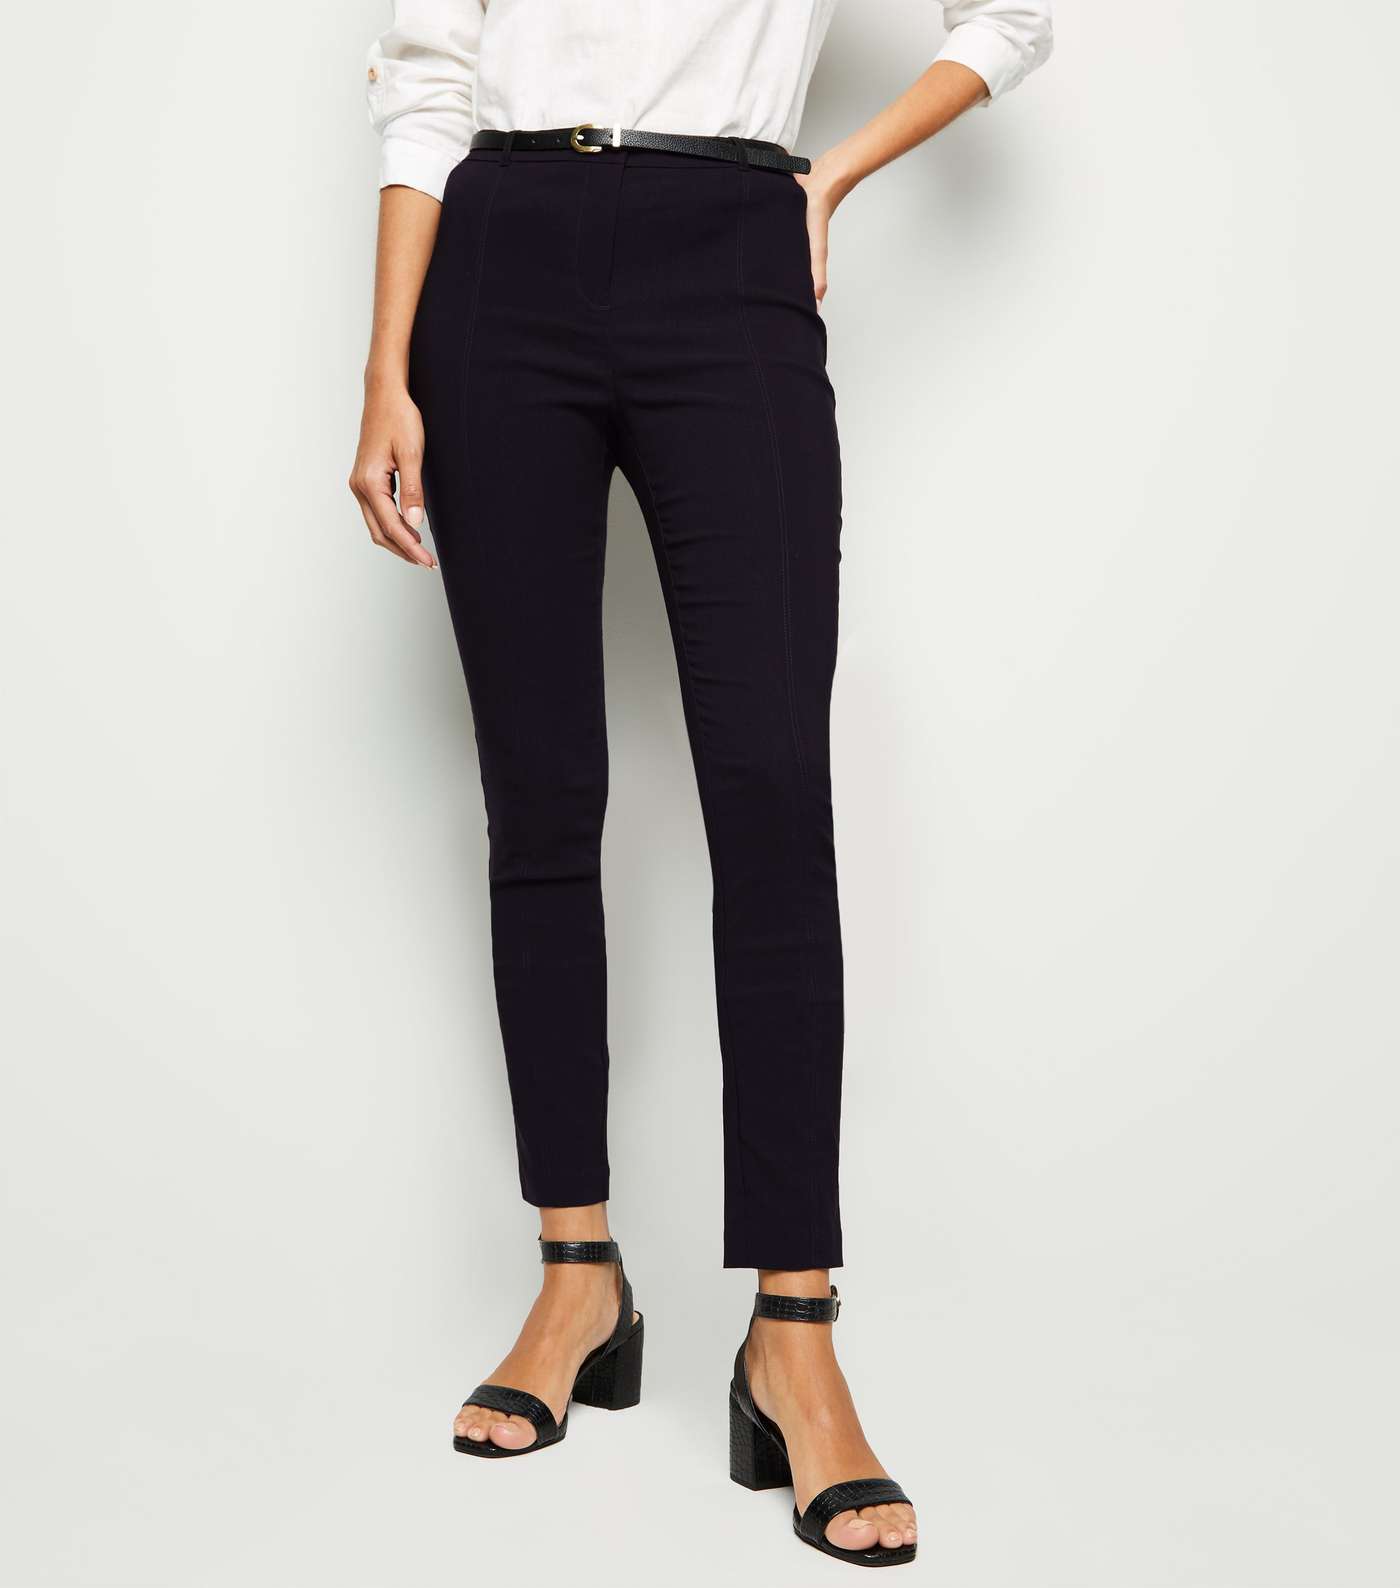 Black Belted Stretch Slim Fit Trousers Image 2